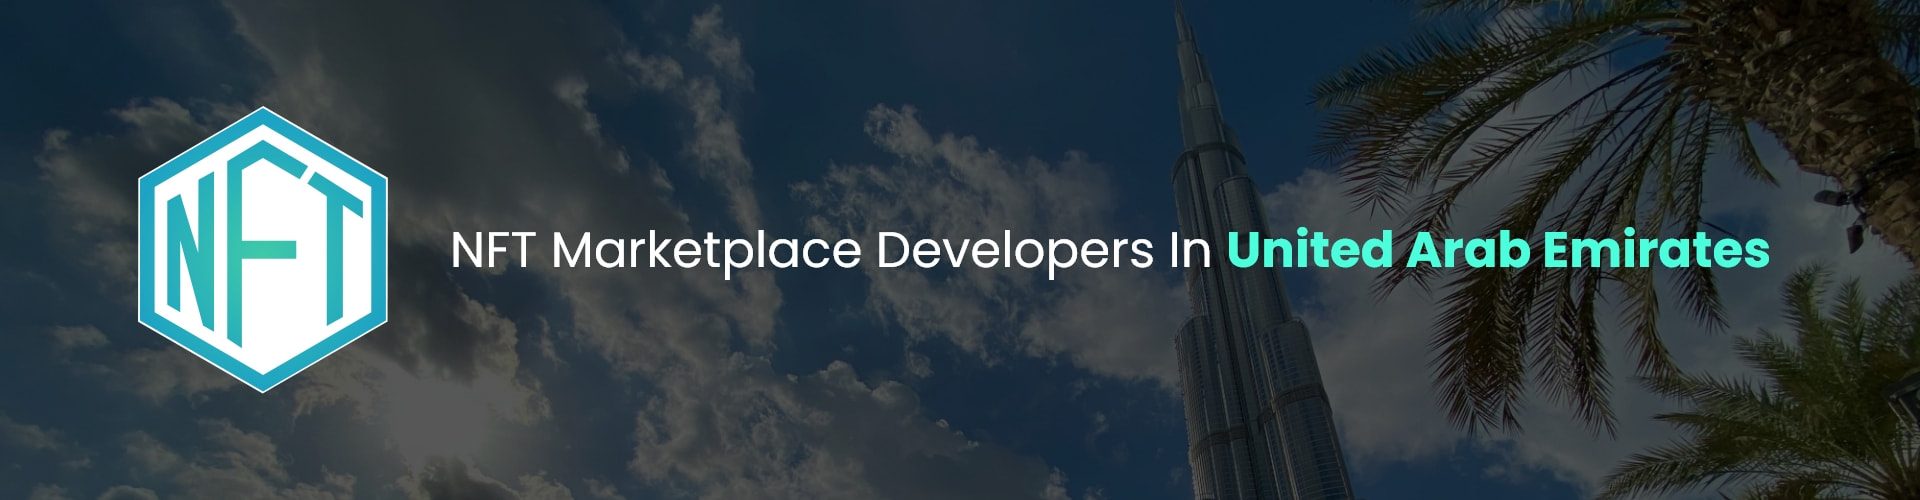 hire nft marketplace developers in united arab emirates